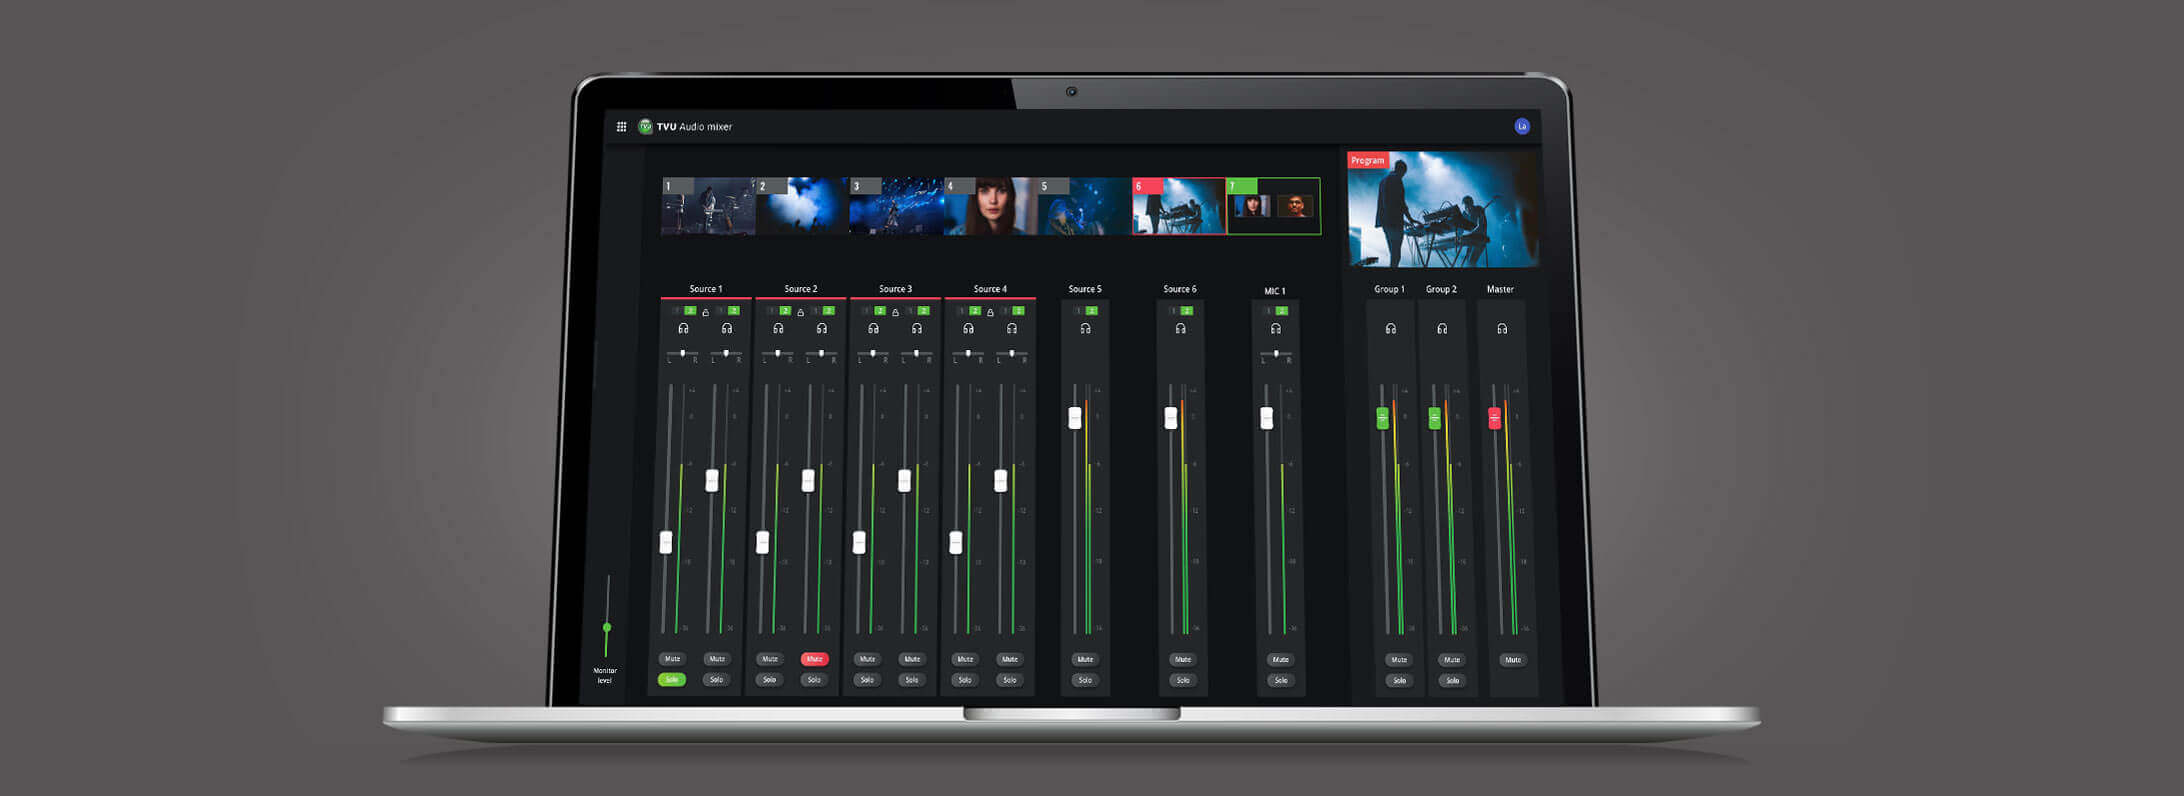 Live audio mixer software for live streaming and video production